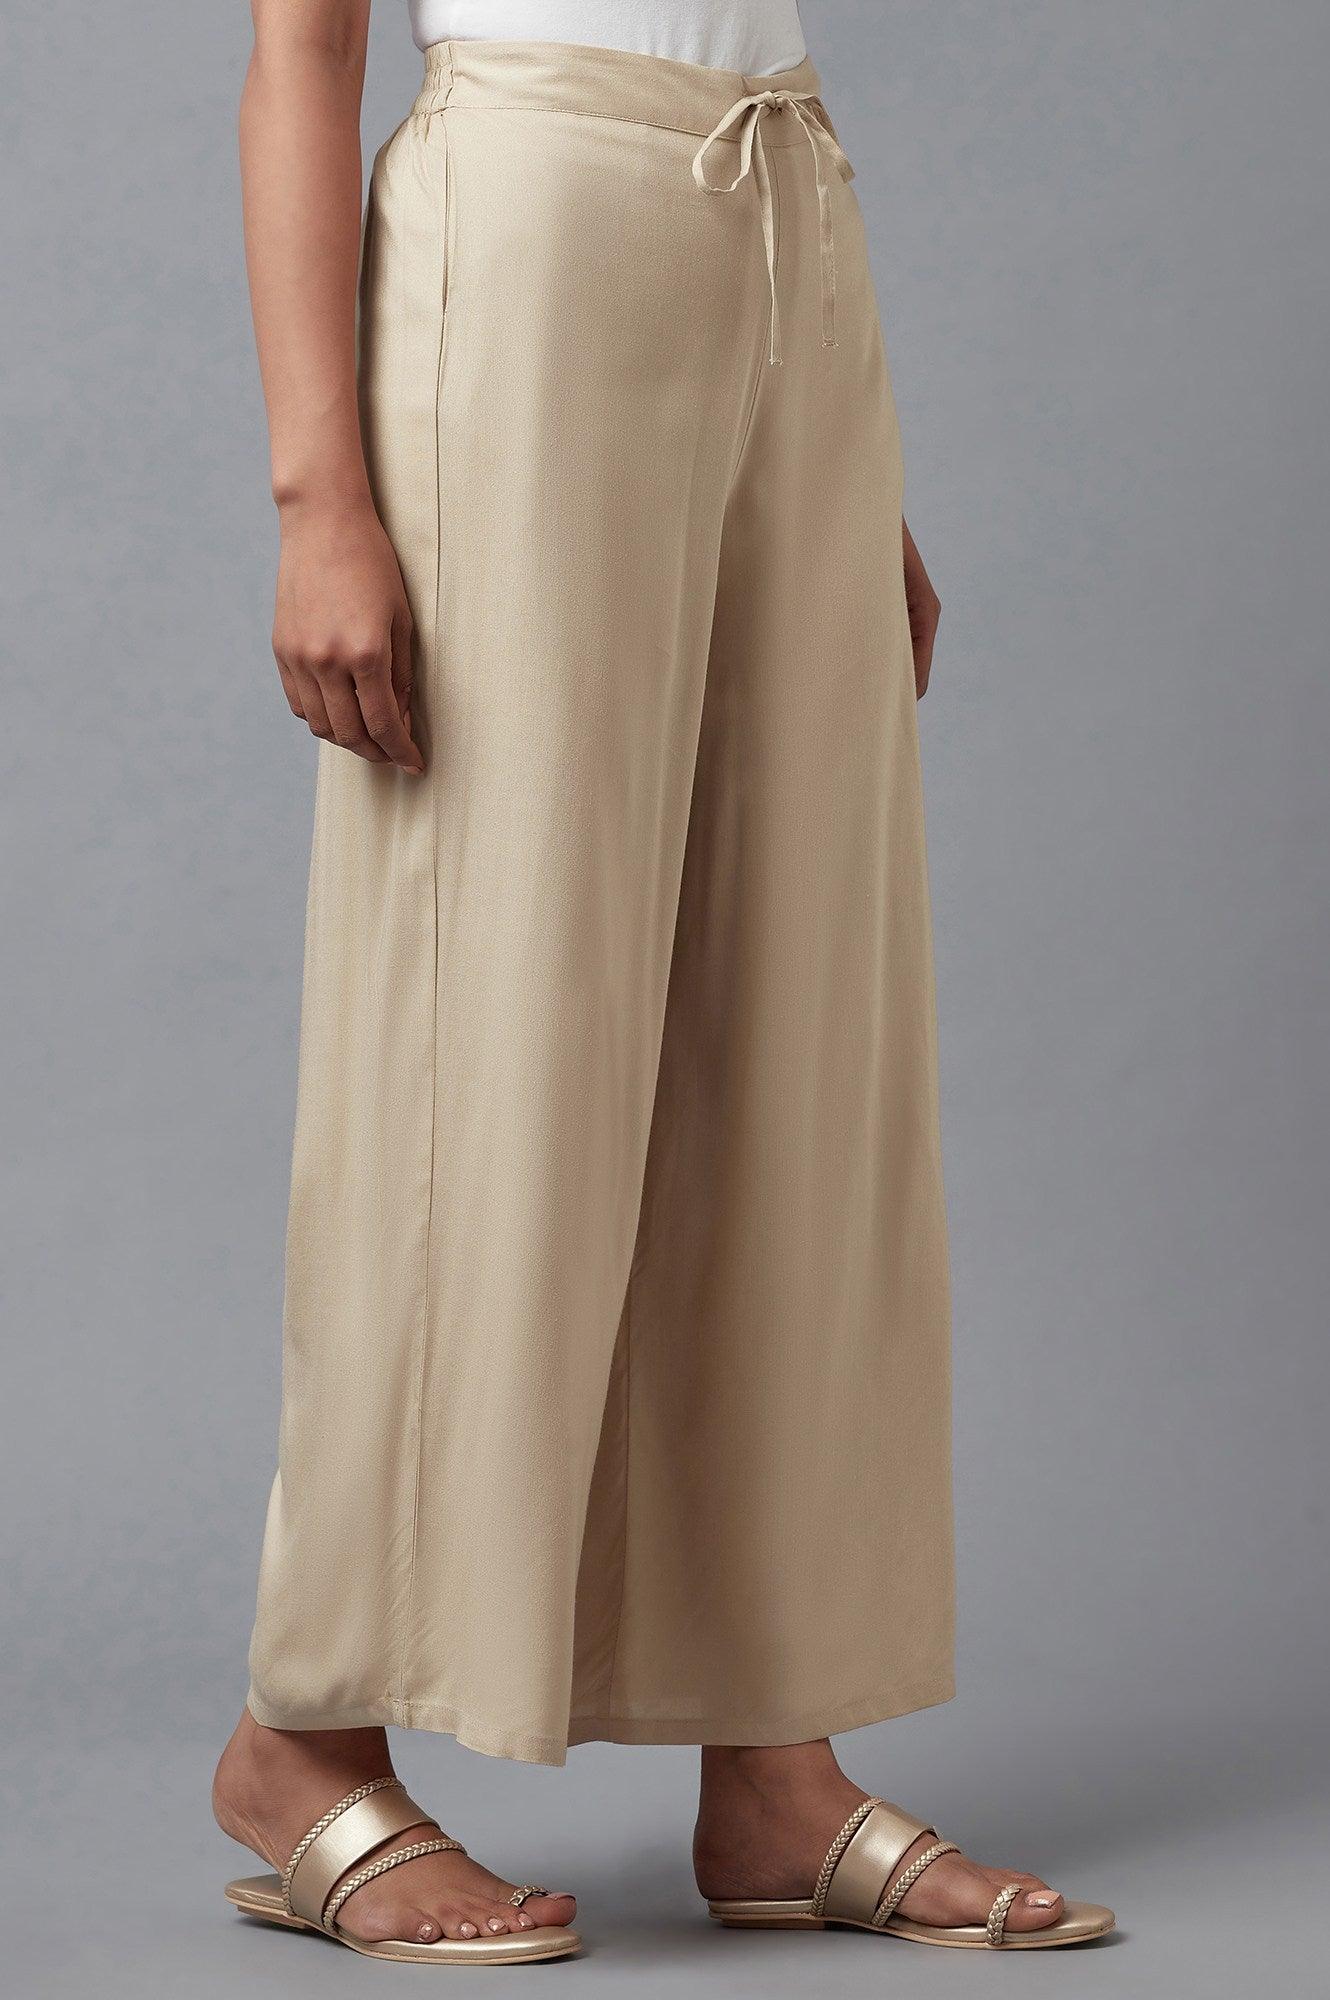 Beige Straight Silhouette Flared Pants - wforwoman